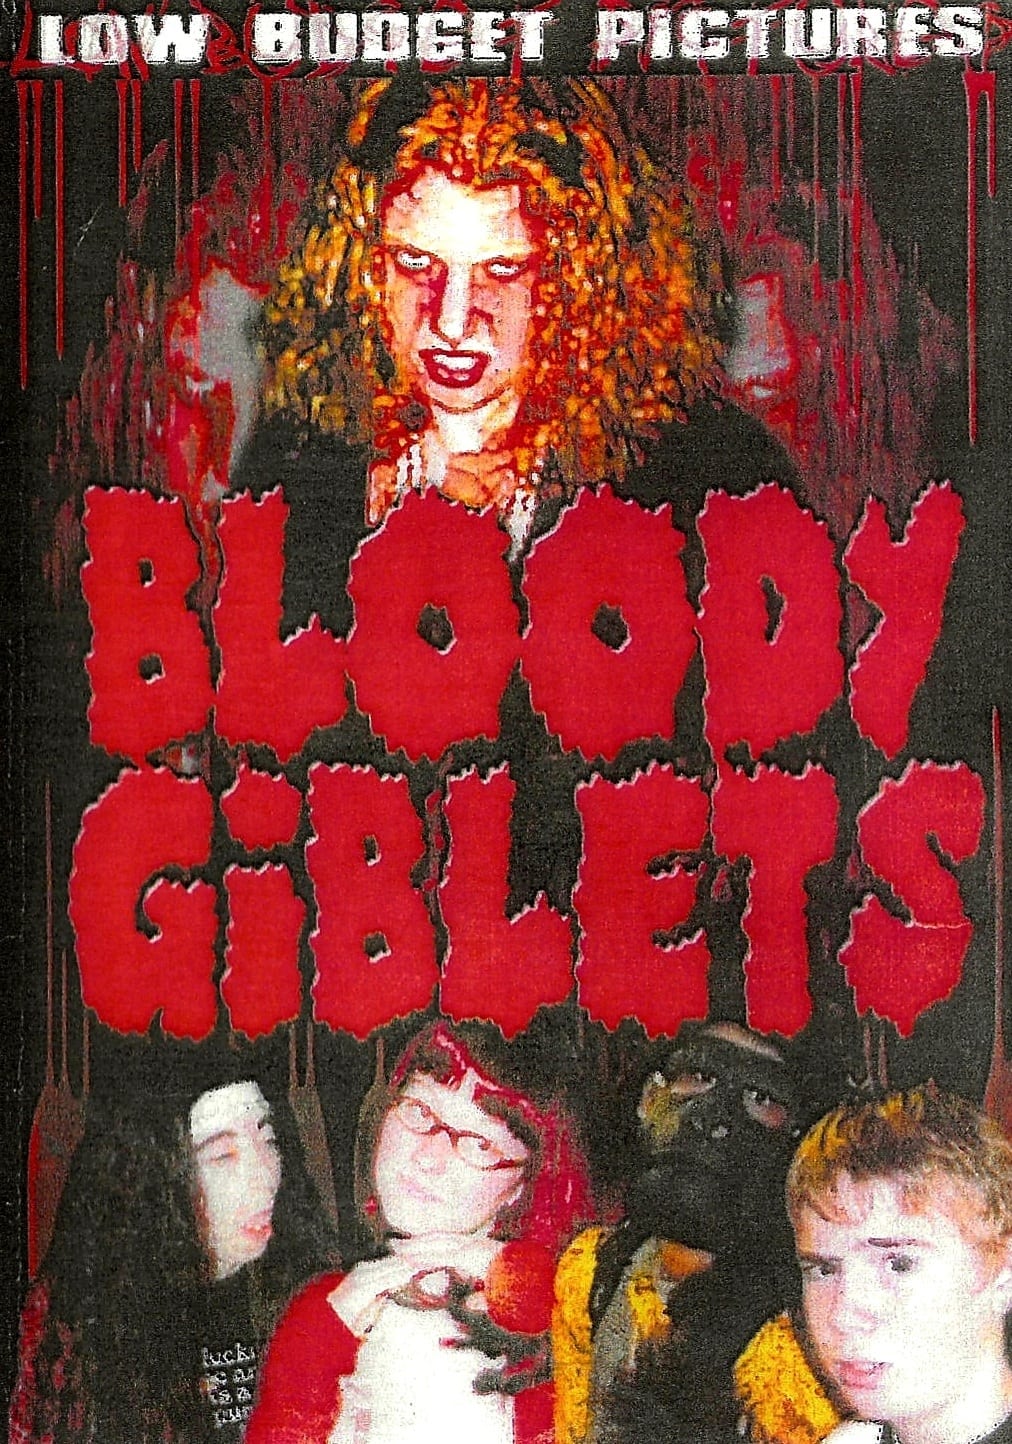 Bloody Giblets: The Legend of Lady Vandalay